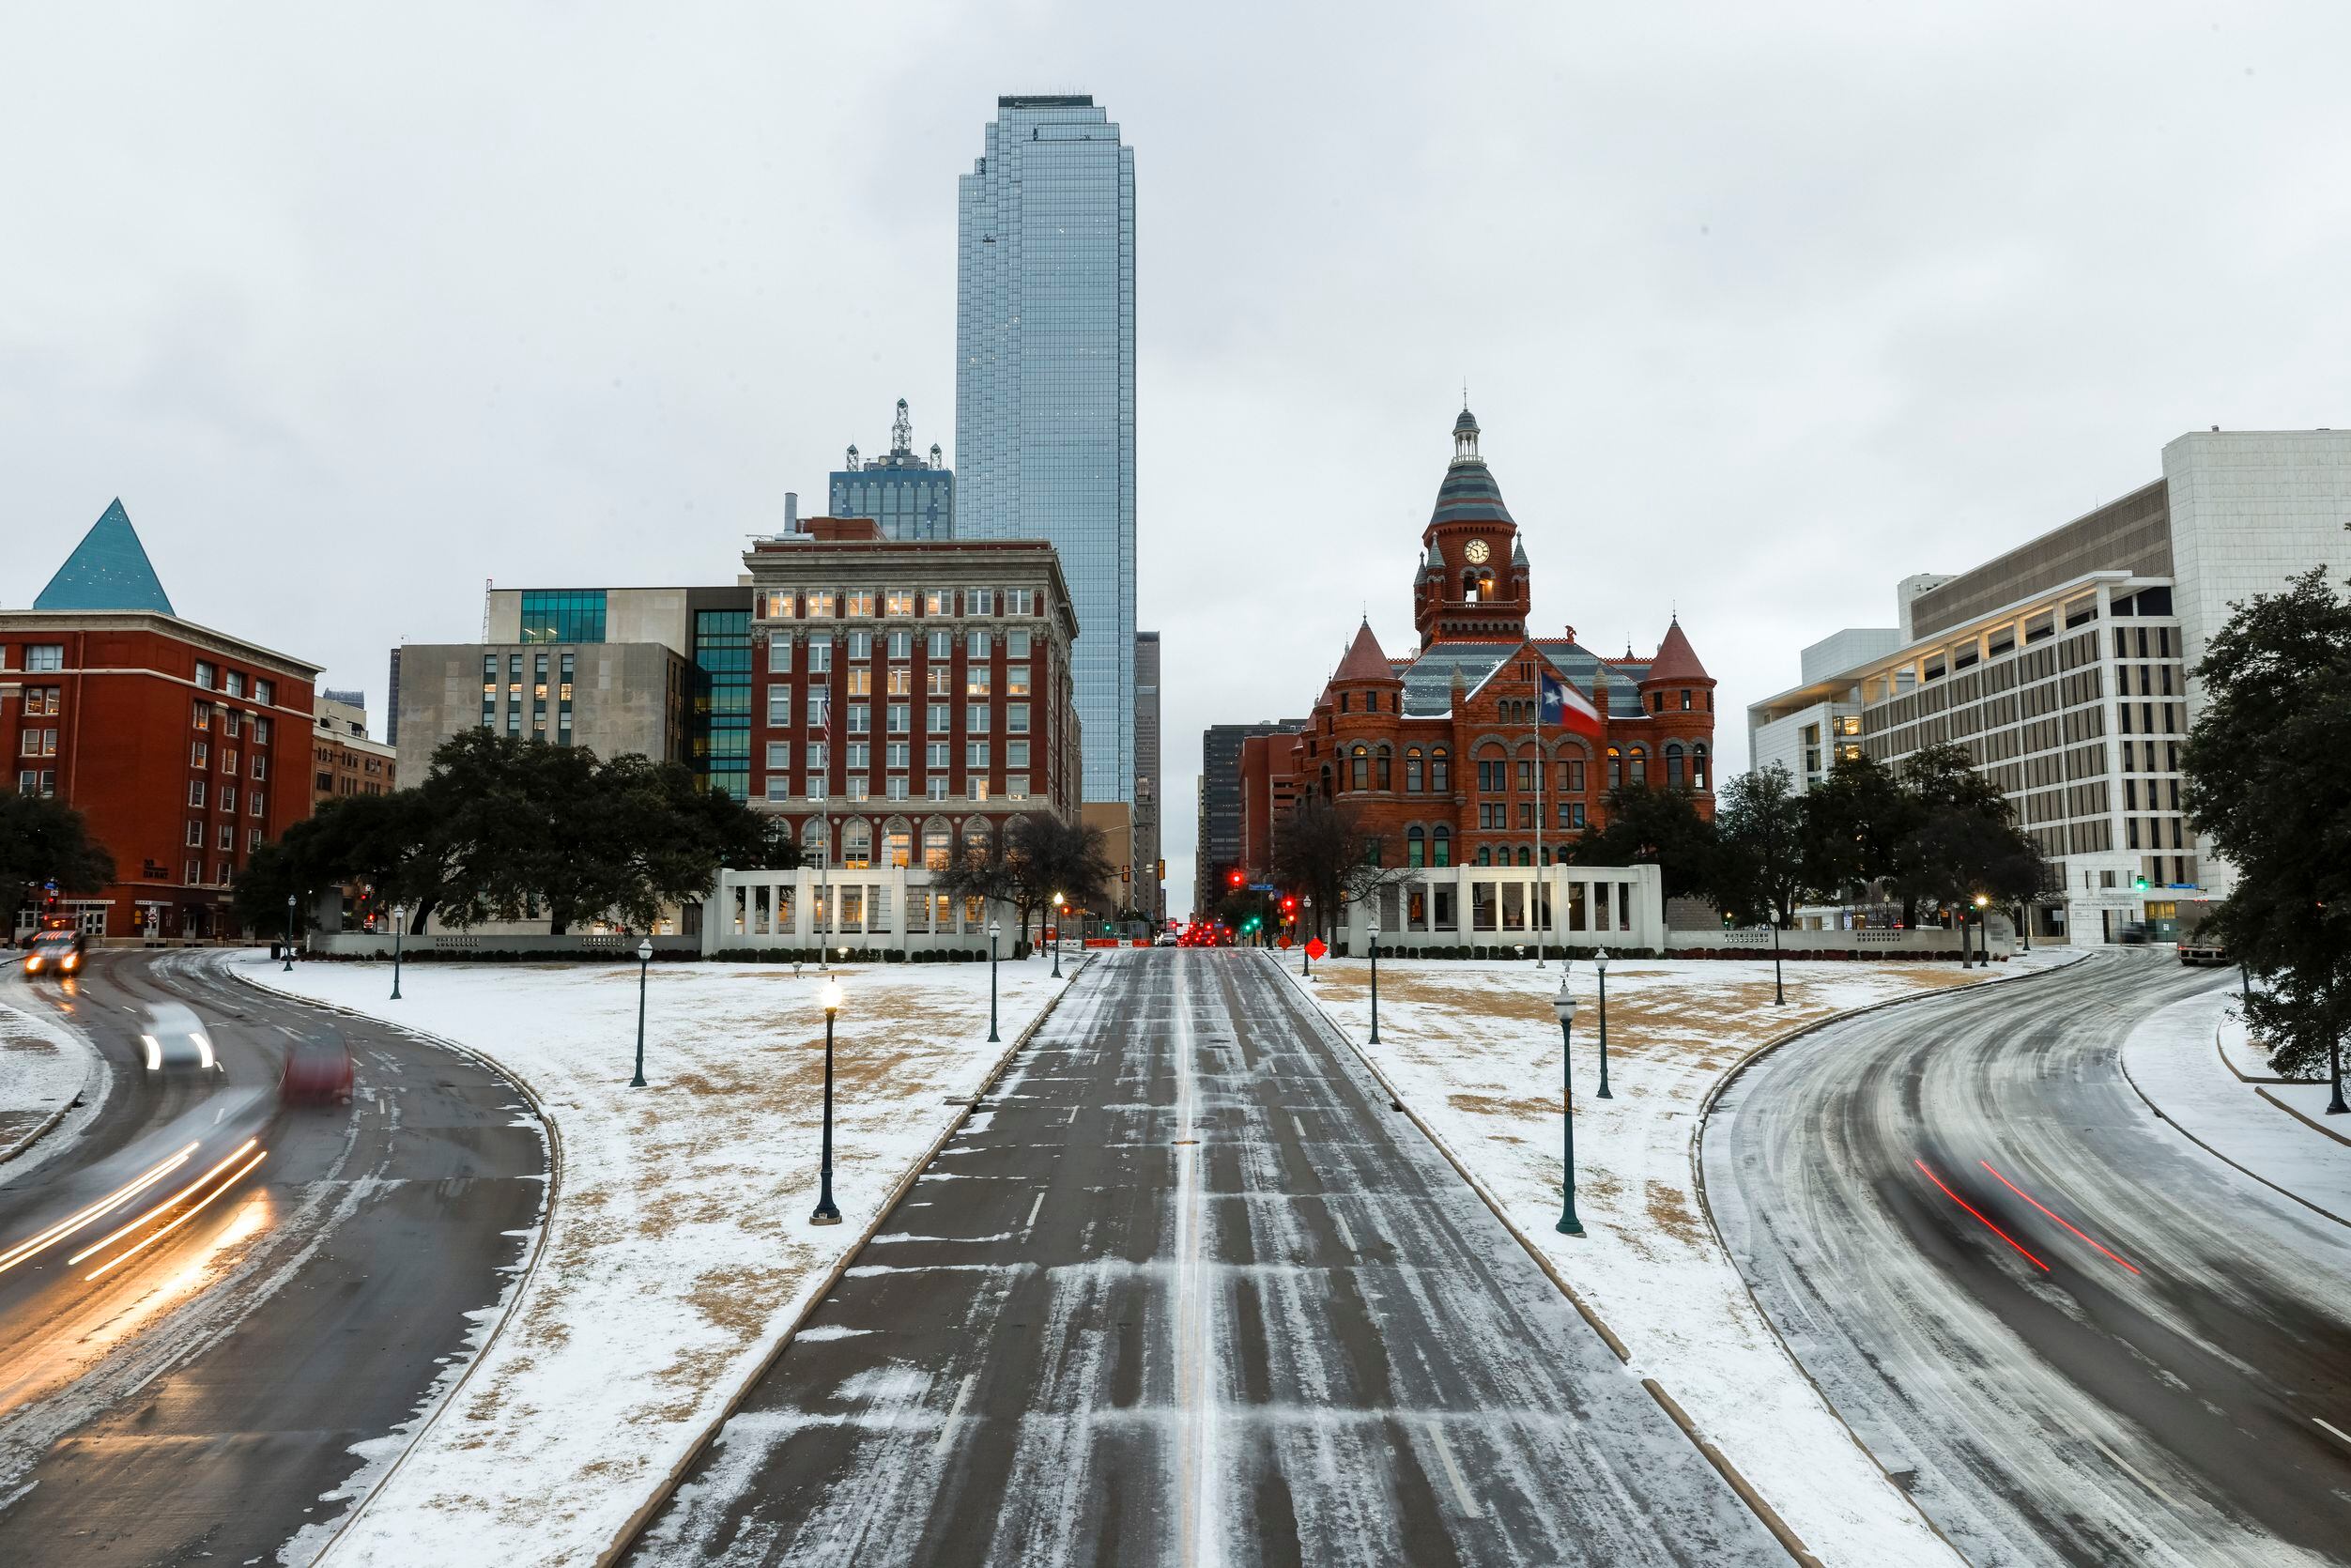 Motorists pass through an icy Dealey Plaza on Thursday, Feb. 3, 2022 in Dallas.